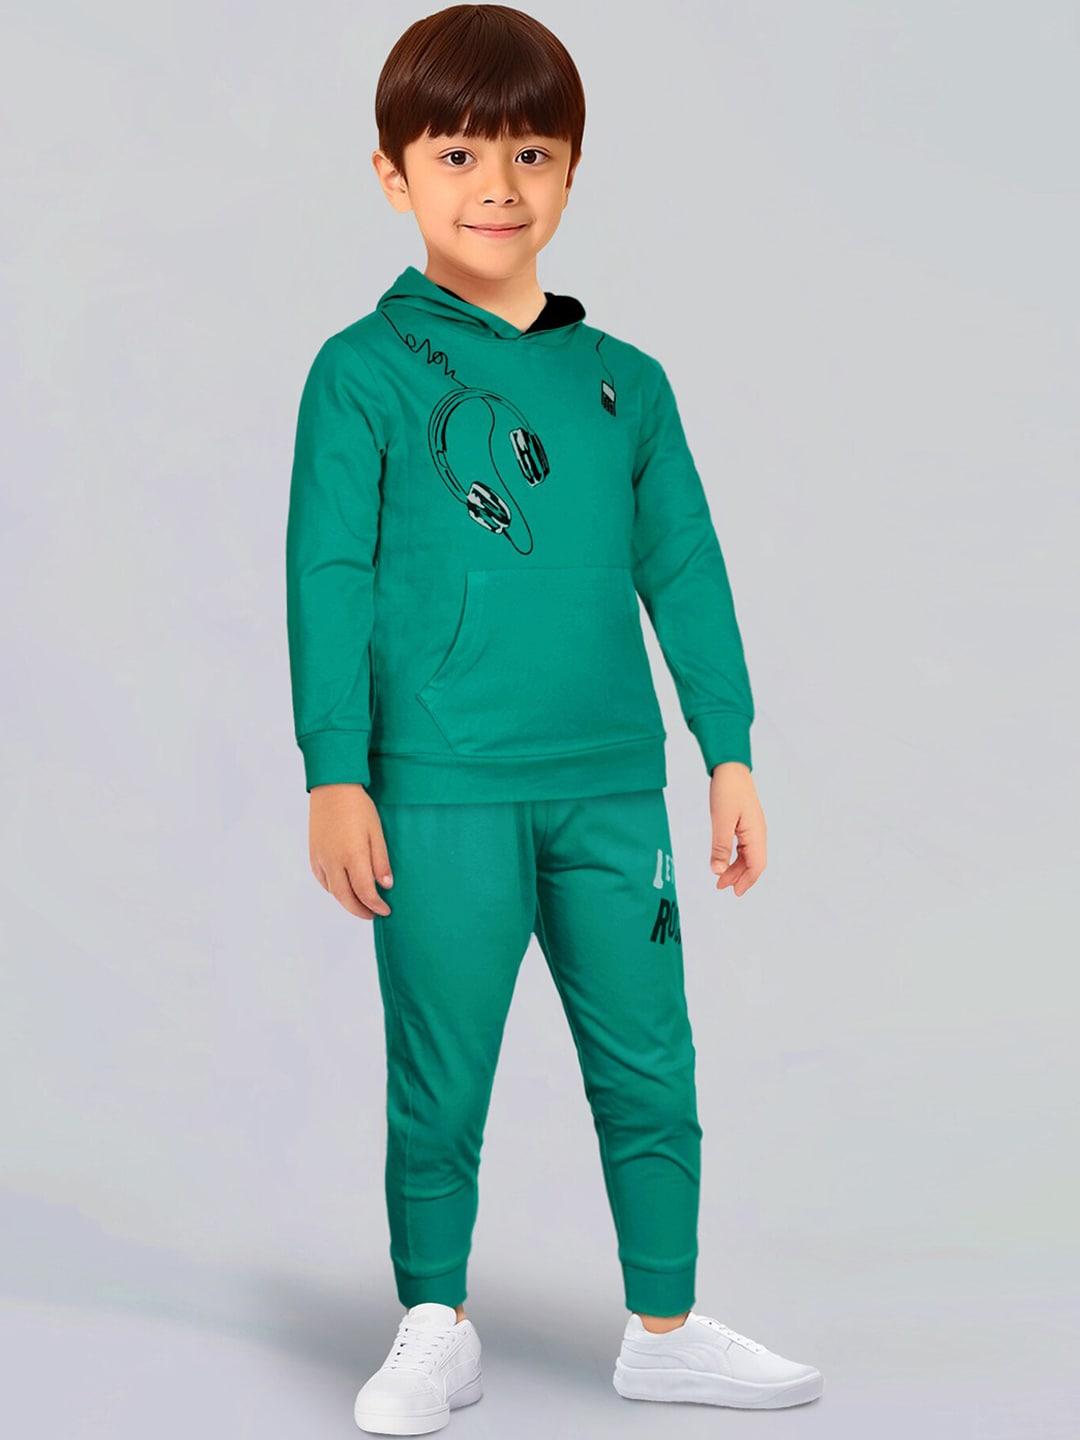 toonyport-boys-graphic-printed-pure-cotton-clothing-set